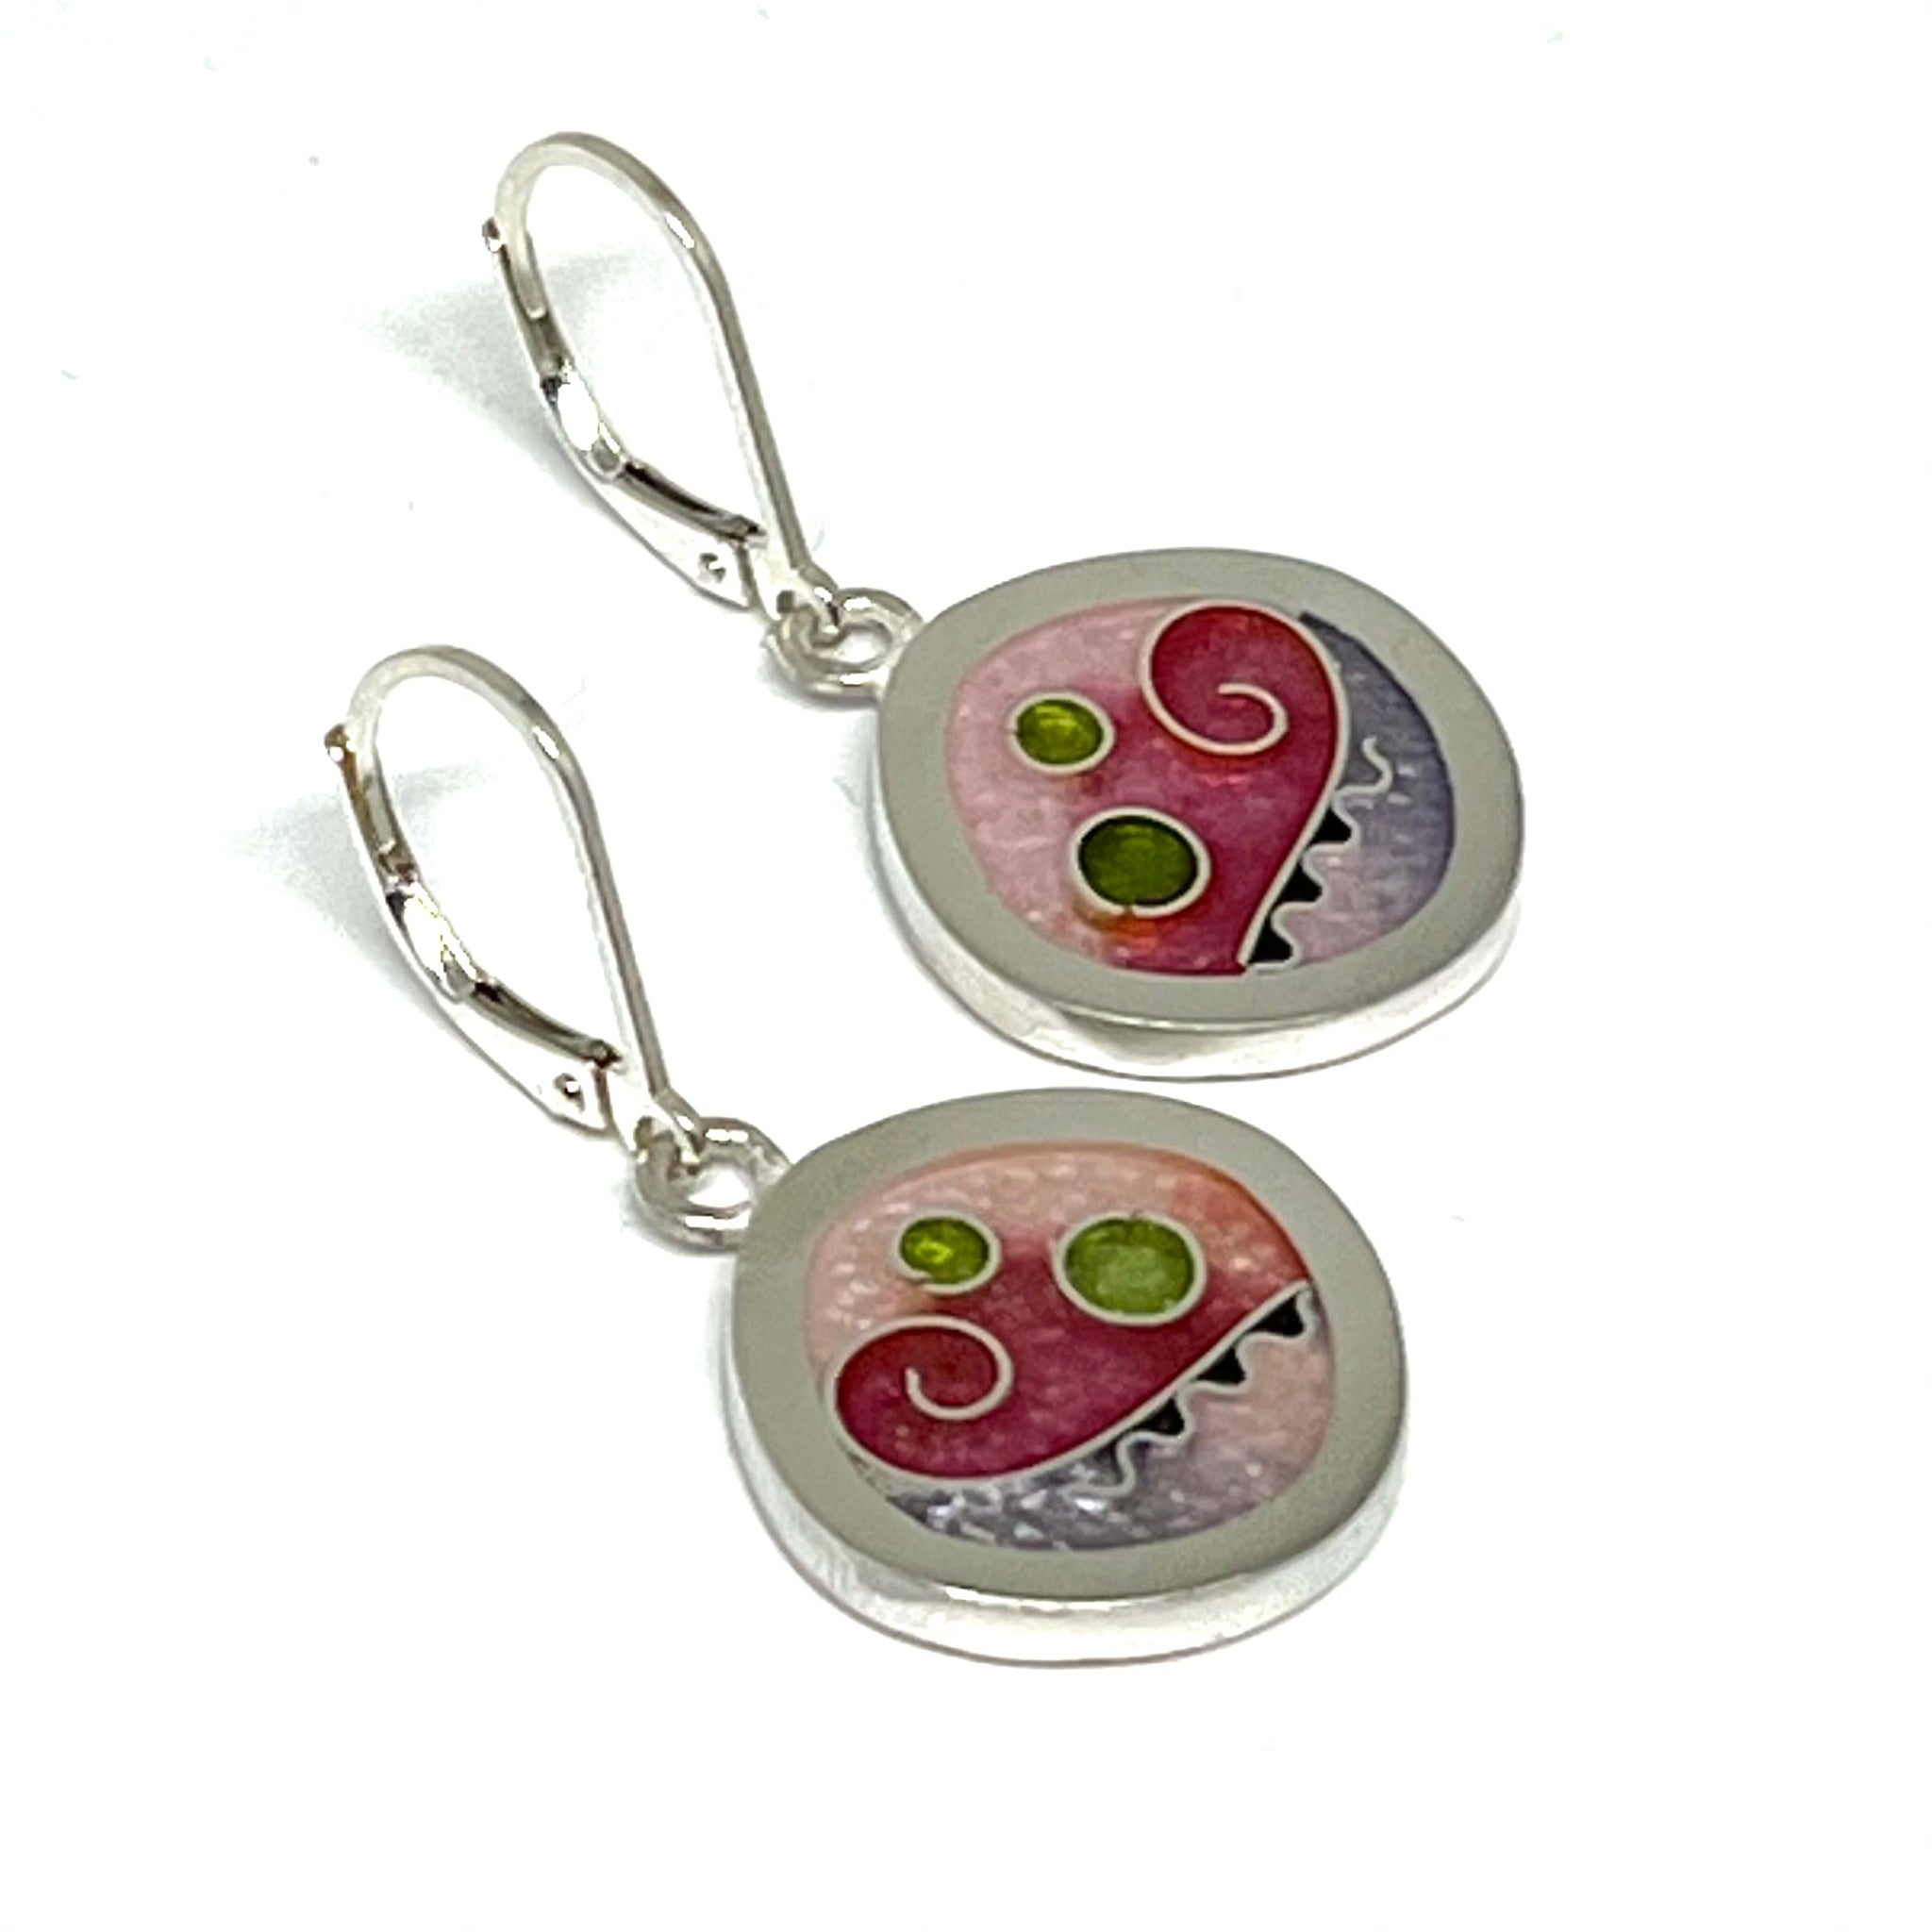 Square Hanging Earrings (Cherry Blossom)